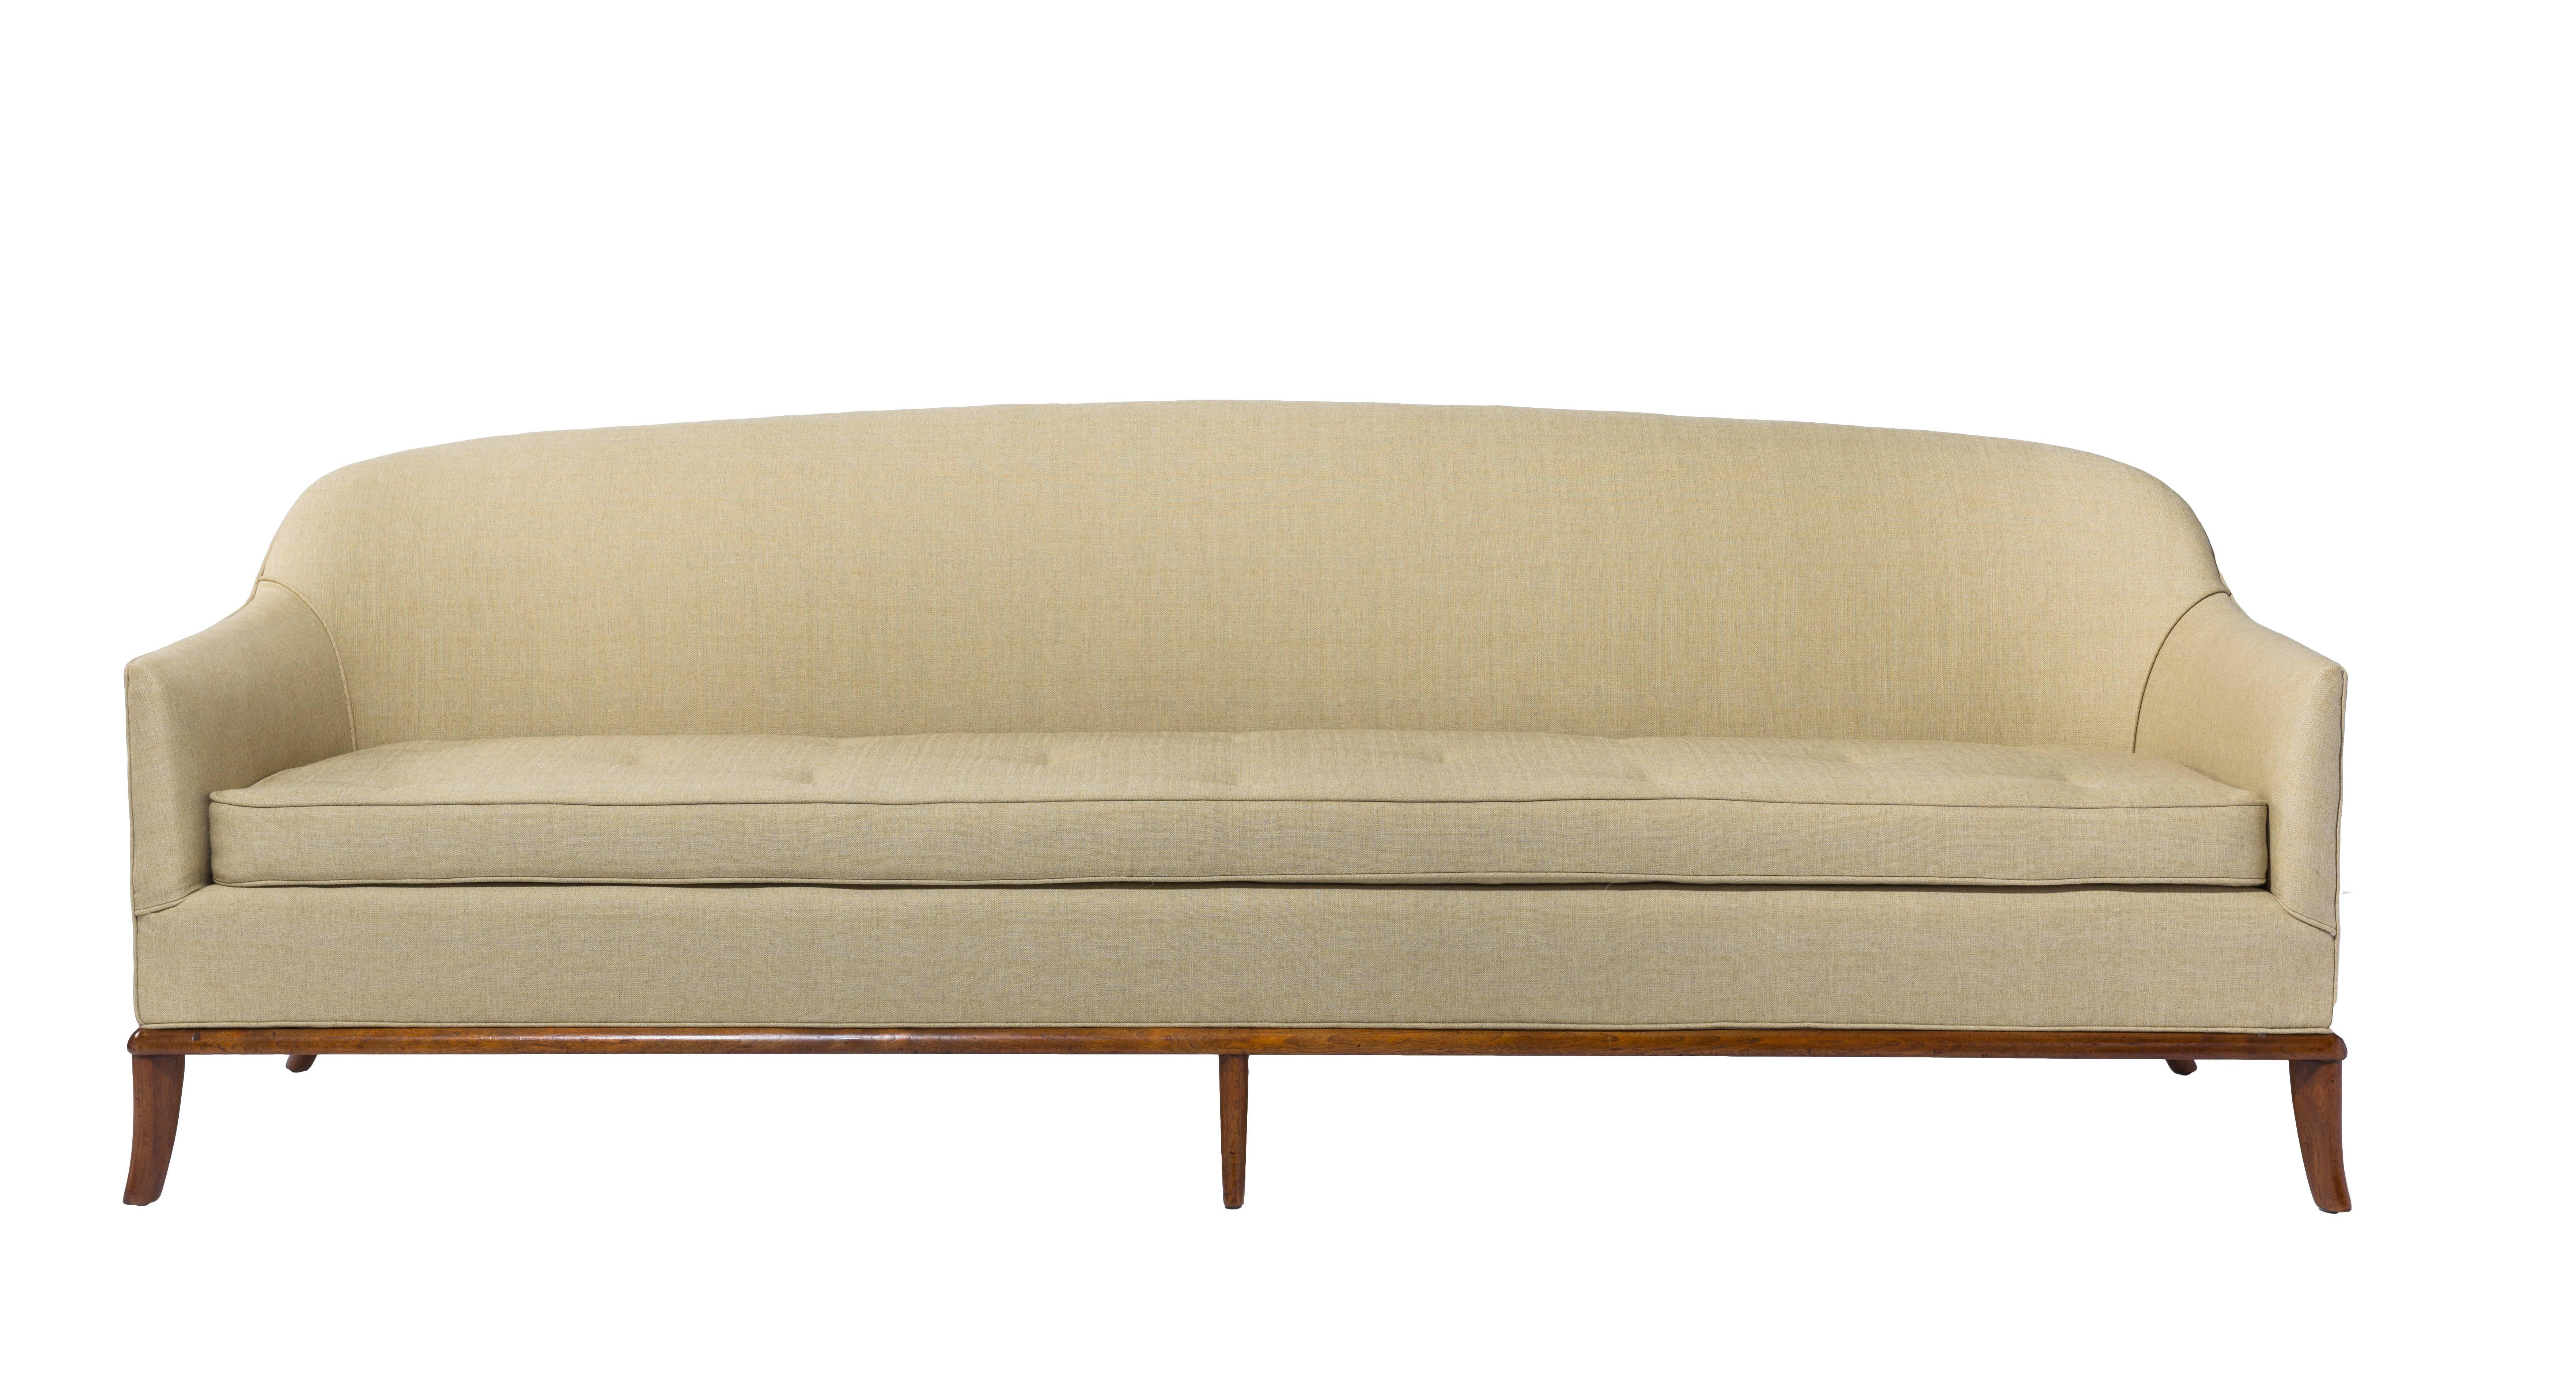 Long and elegant 7.5 Gibbings curved back sofa on a six sabre legged walnut base and manufactured by Widdicomb. Recently reupholstered and with a refinished base. A rarely seen design from Gibbings.